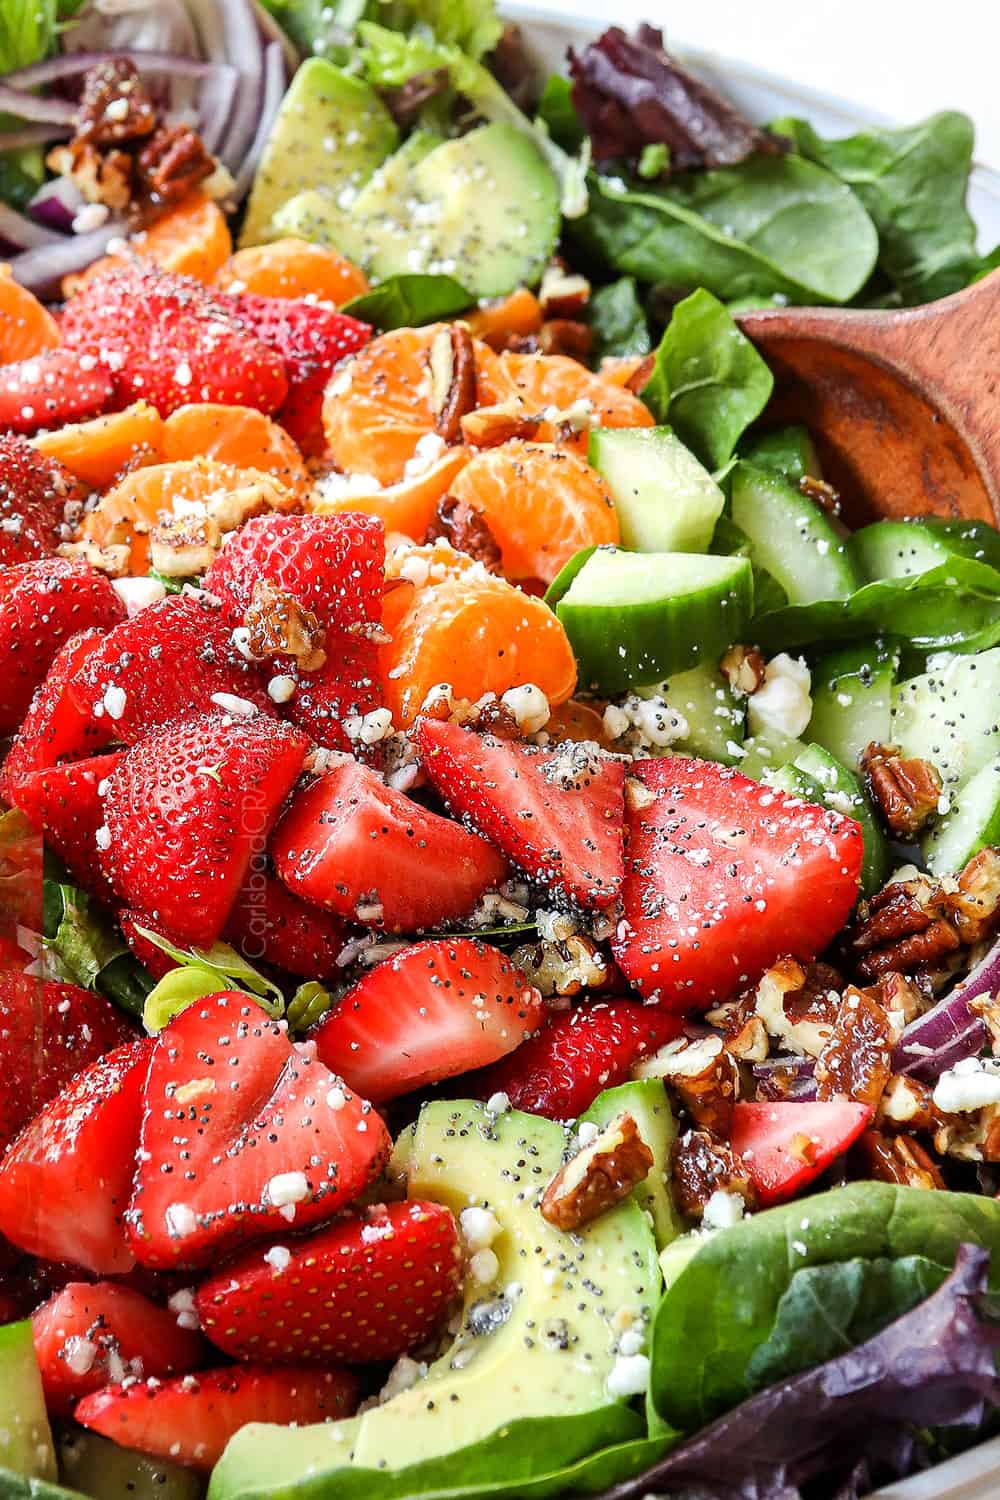 showing how to make strawberry spinach salad recipe by tossing ingredients together in a bowl